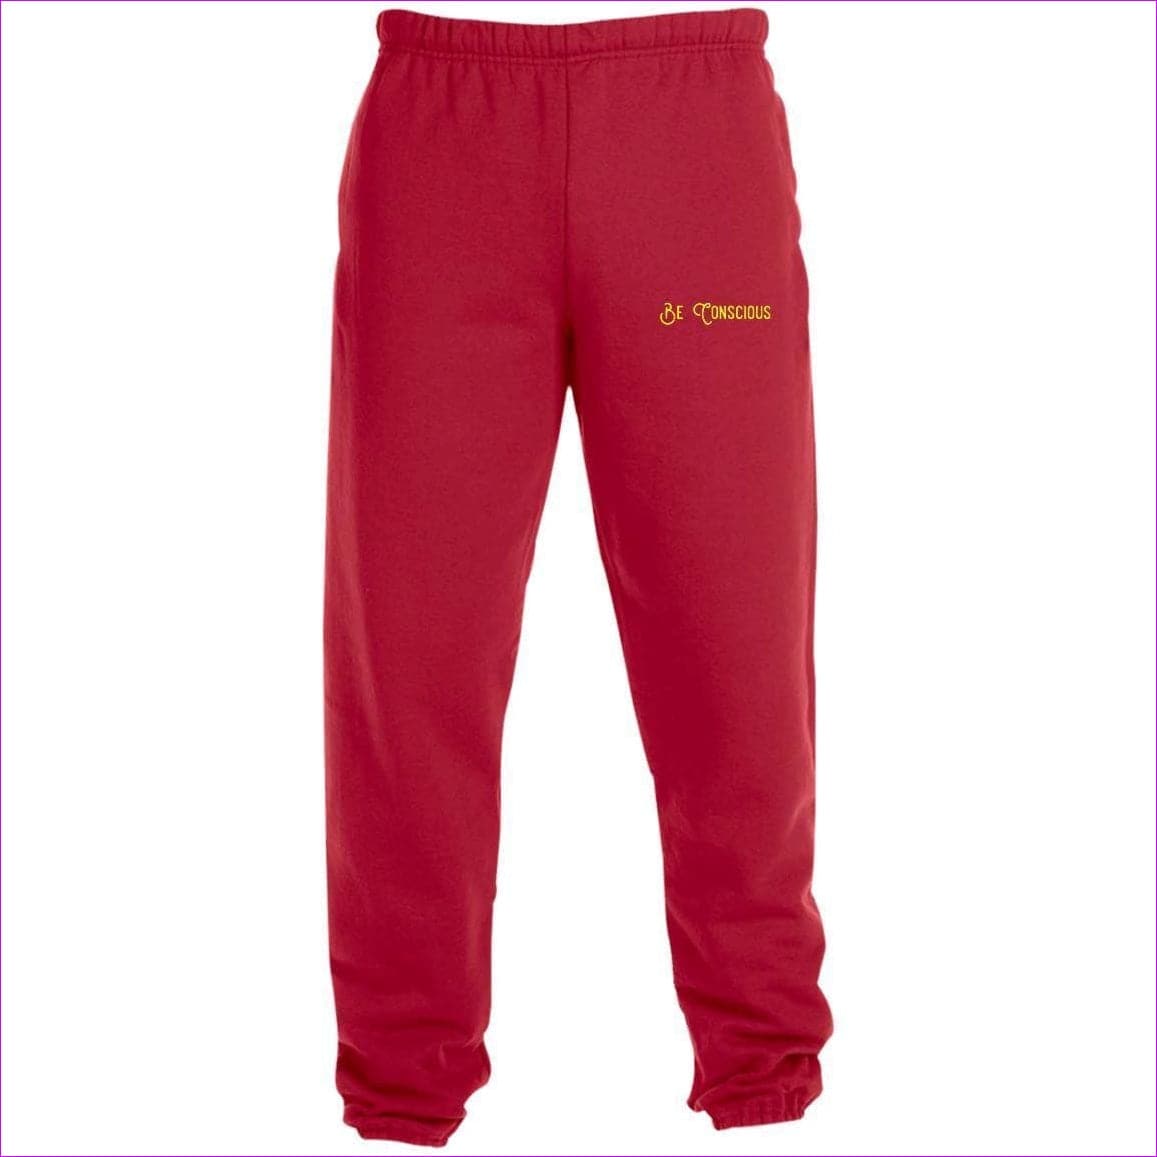 True Red - Be Conscious Sweatpants with Pockets - mens sweatpants at TFC&H Co.